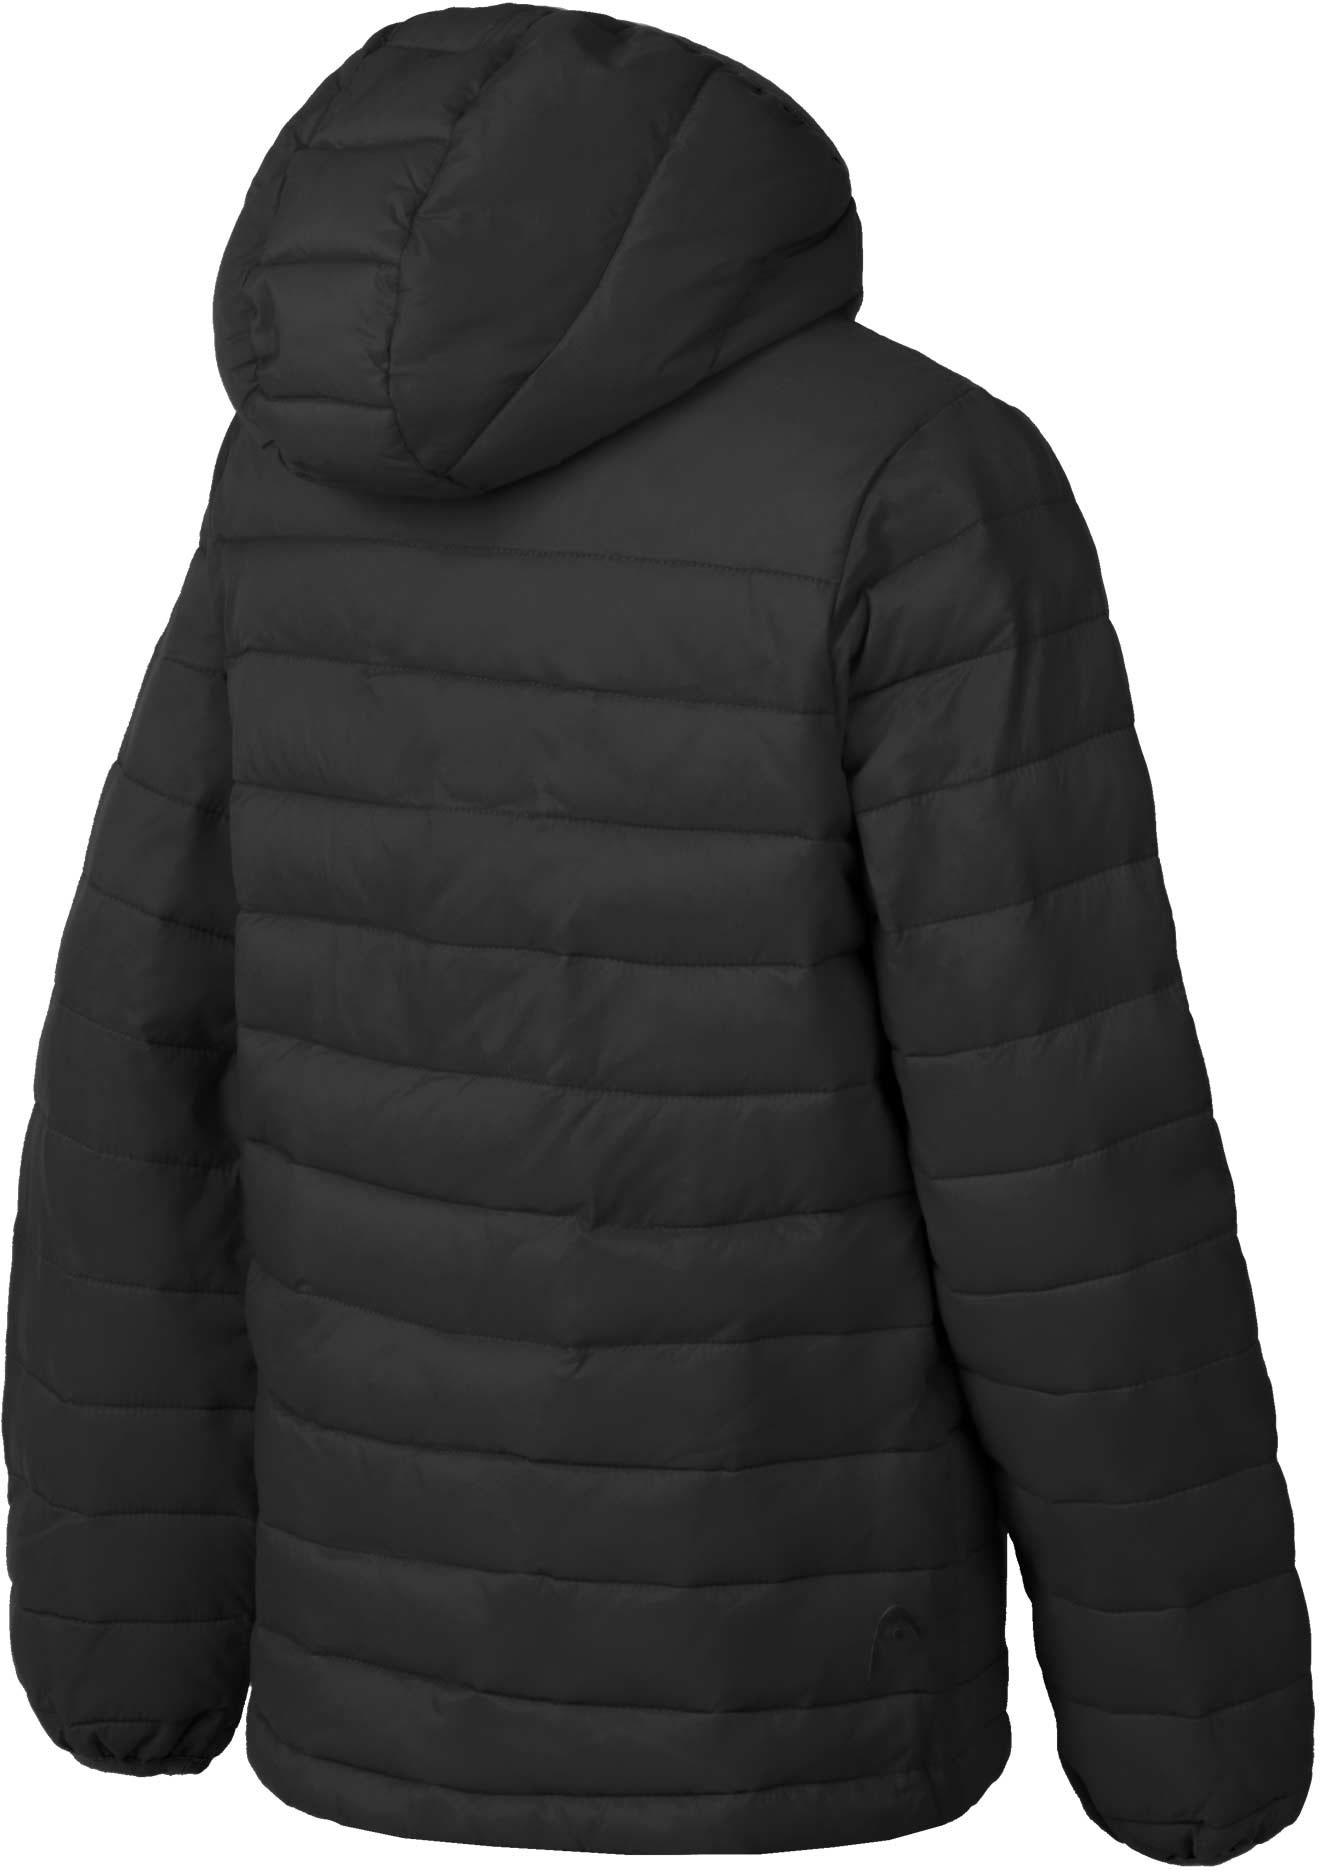 JAKE - Boys' Quilted Jacket